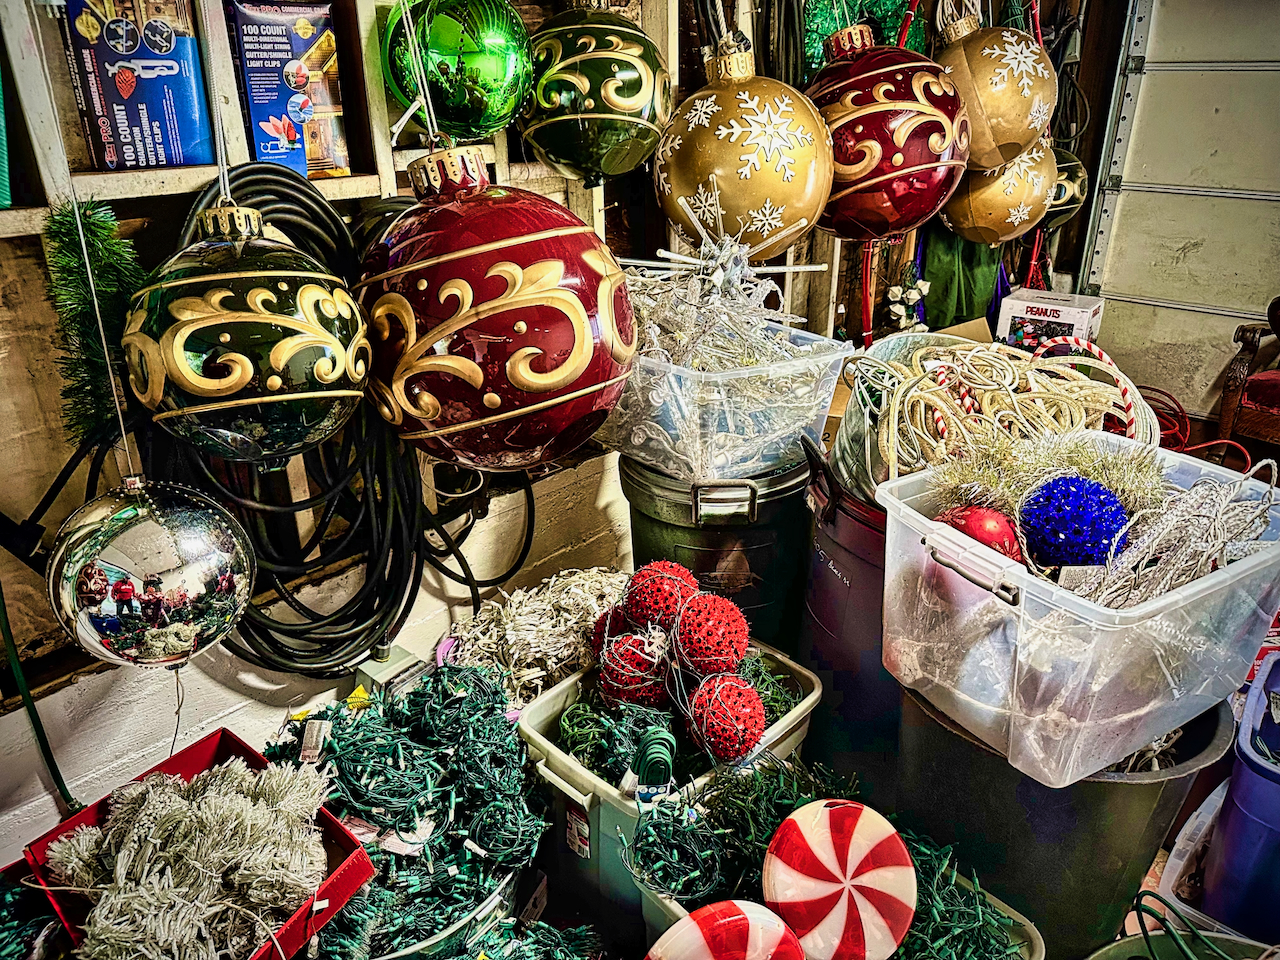 ornaments and lights